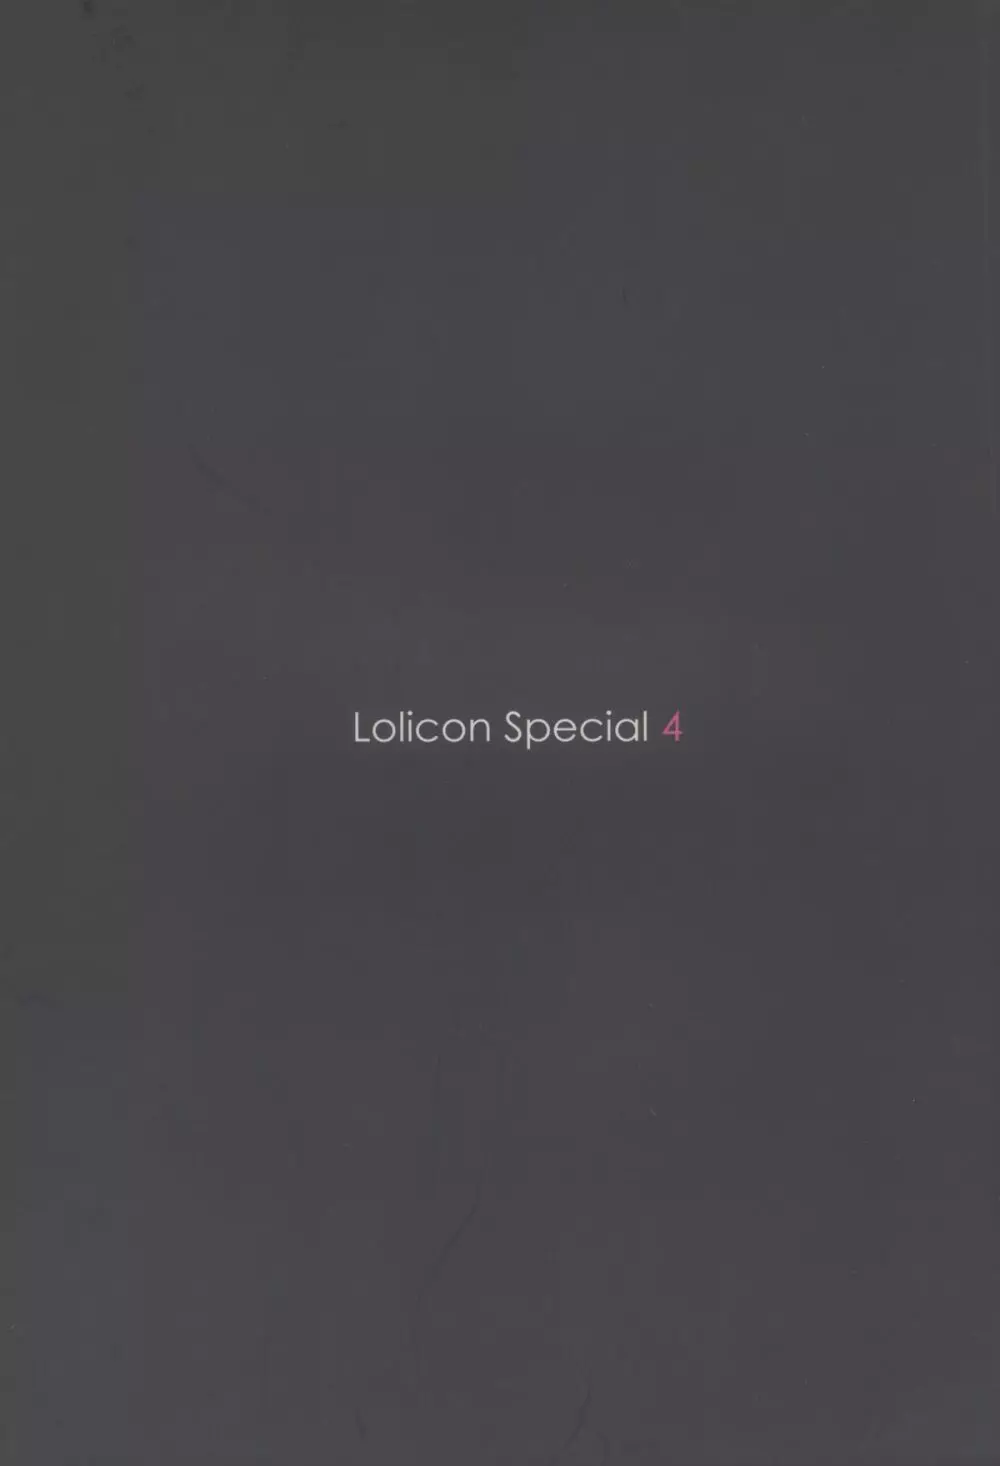 Lolicon Special 4 2ページ